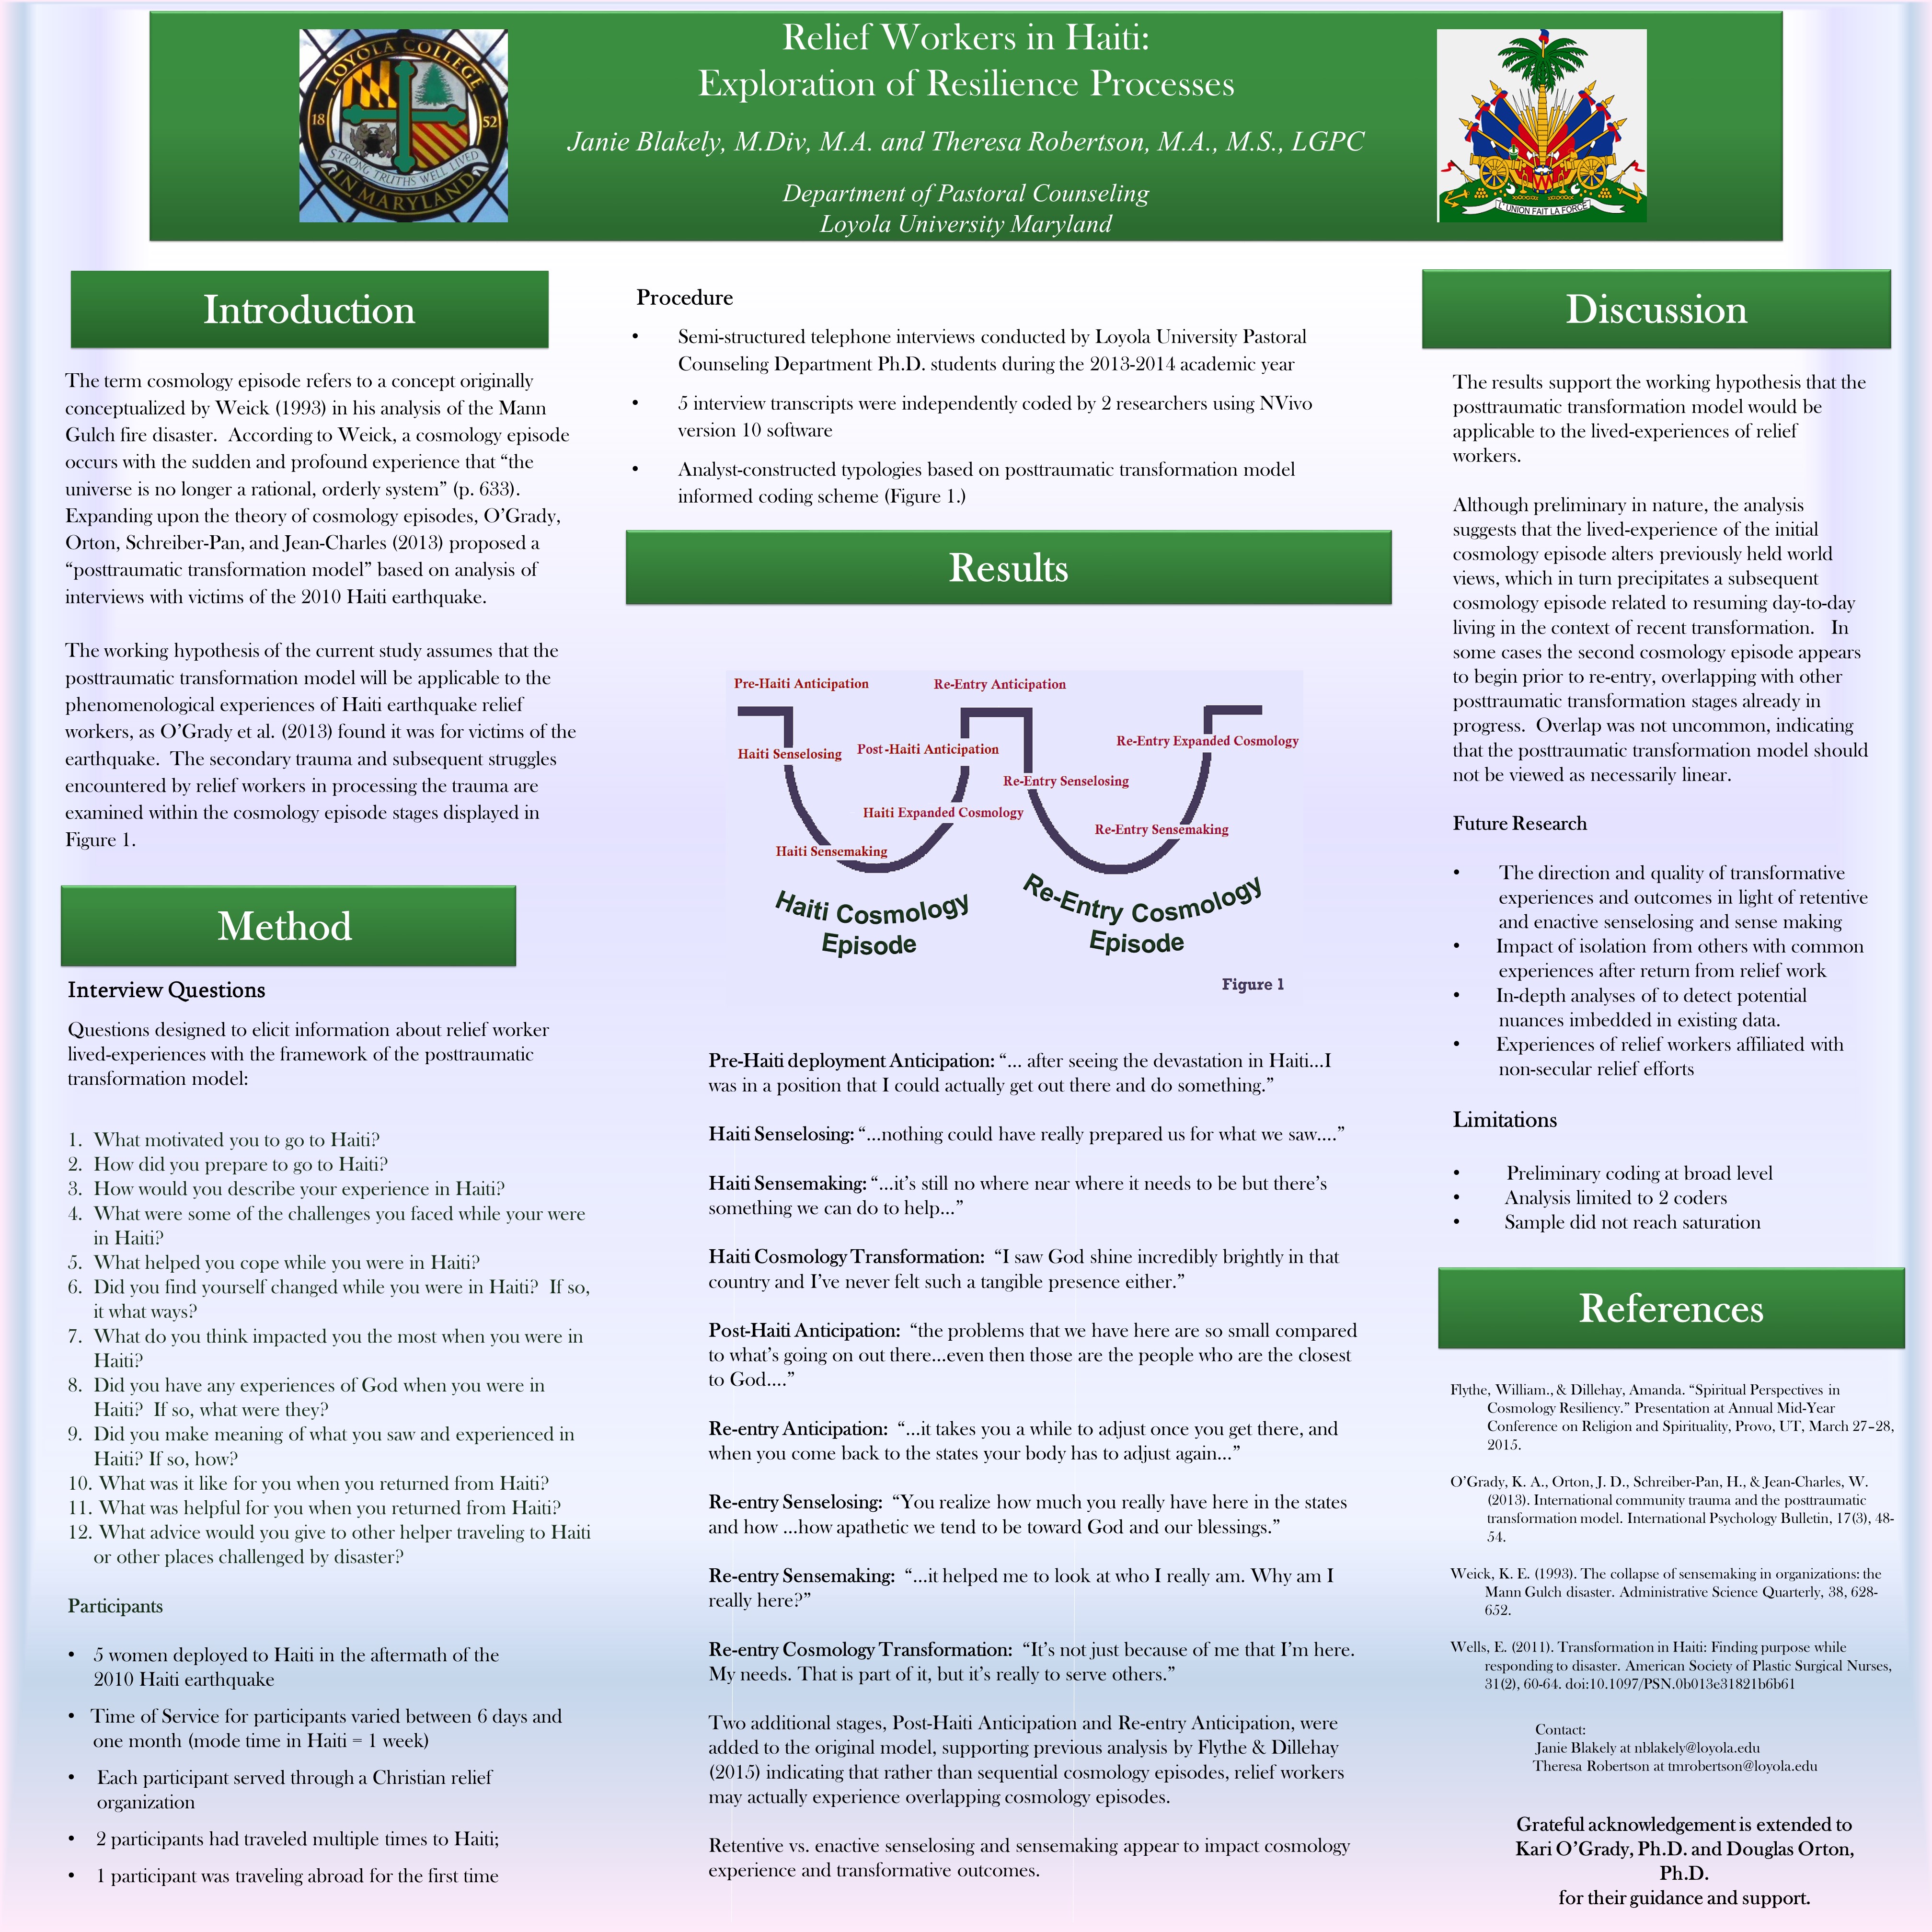 poster image: Relief Workers in Haiti: Exploration of Resilience Processes